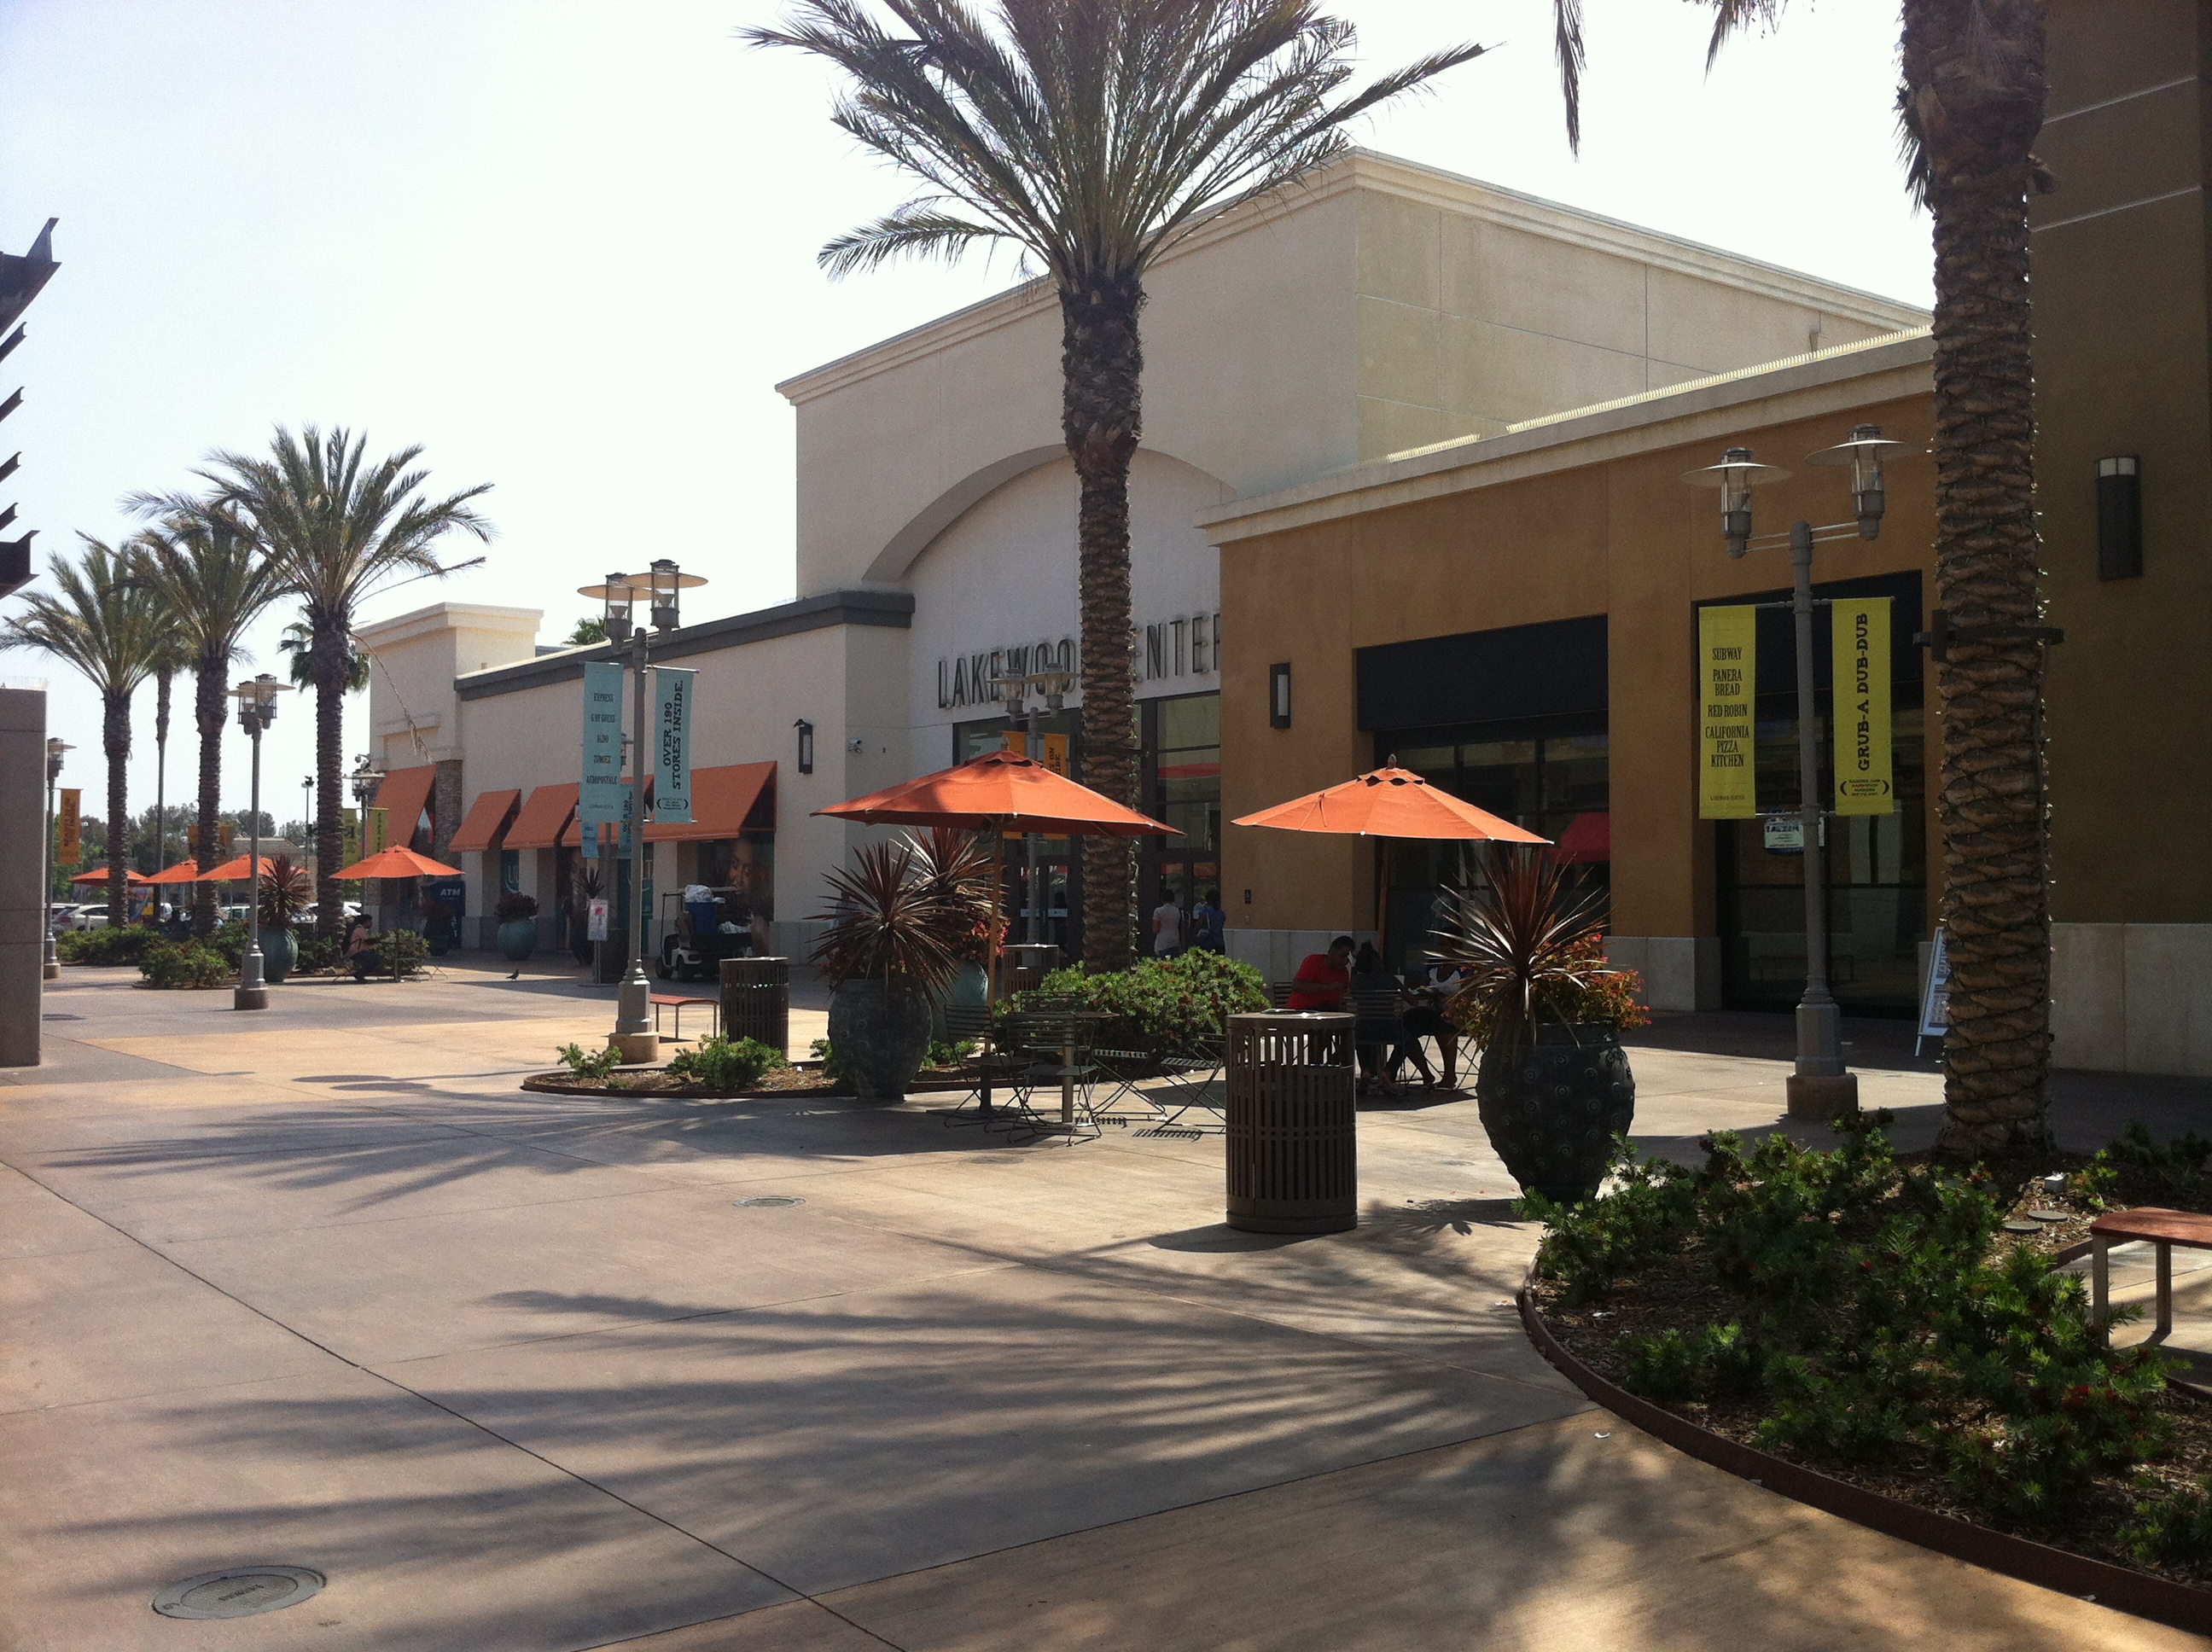 Best Shopping Centers & Malls In Los Angeles - CBS Los Angeles